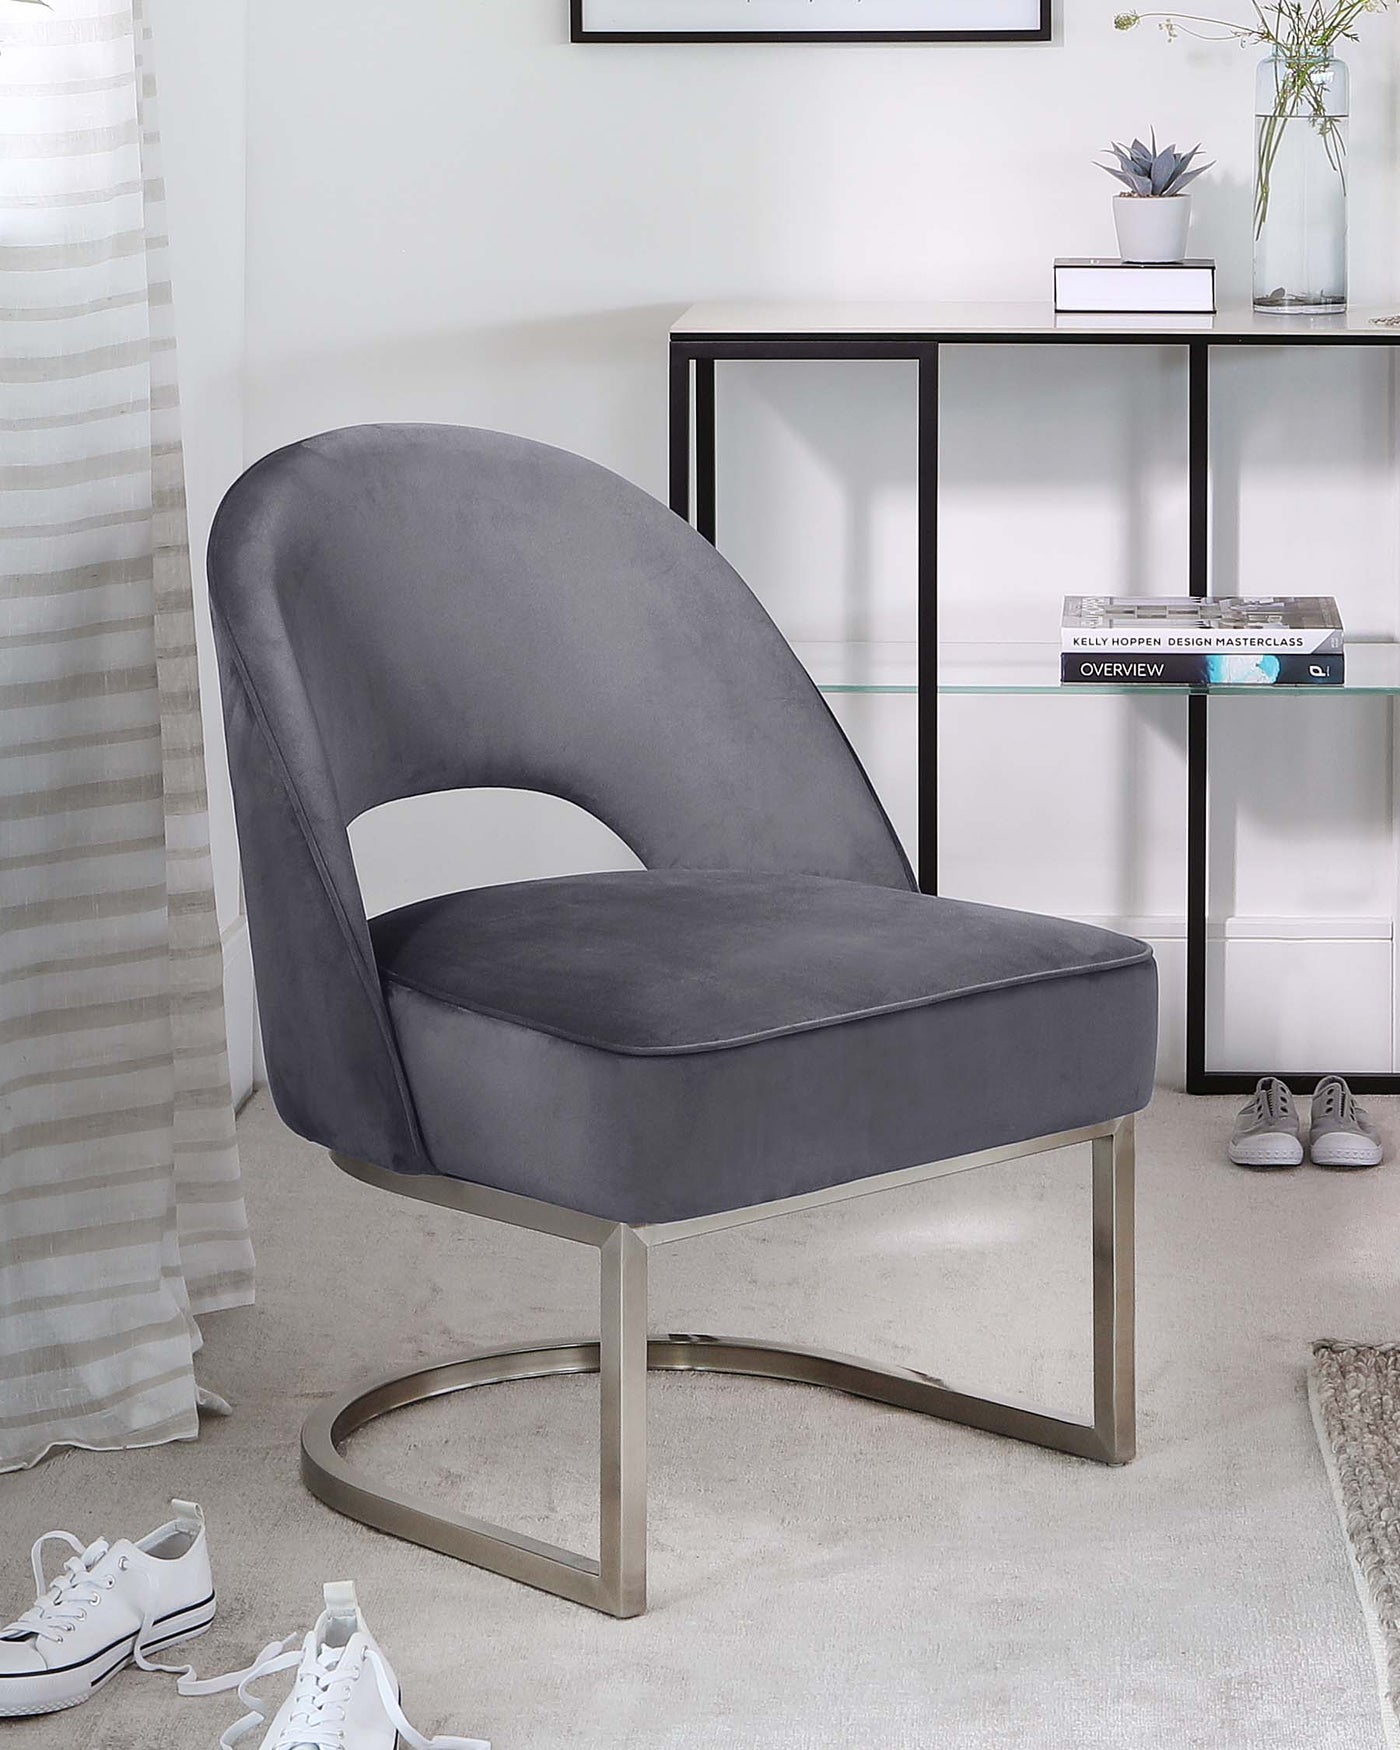 Modern grey velvet accent chair with curved backrest and unique silver metal base, positioned beside a black-framed shelving unit with glass shelves displaying books and decorative items, set against a neutral-toned room with white walls and light carpet flooring.